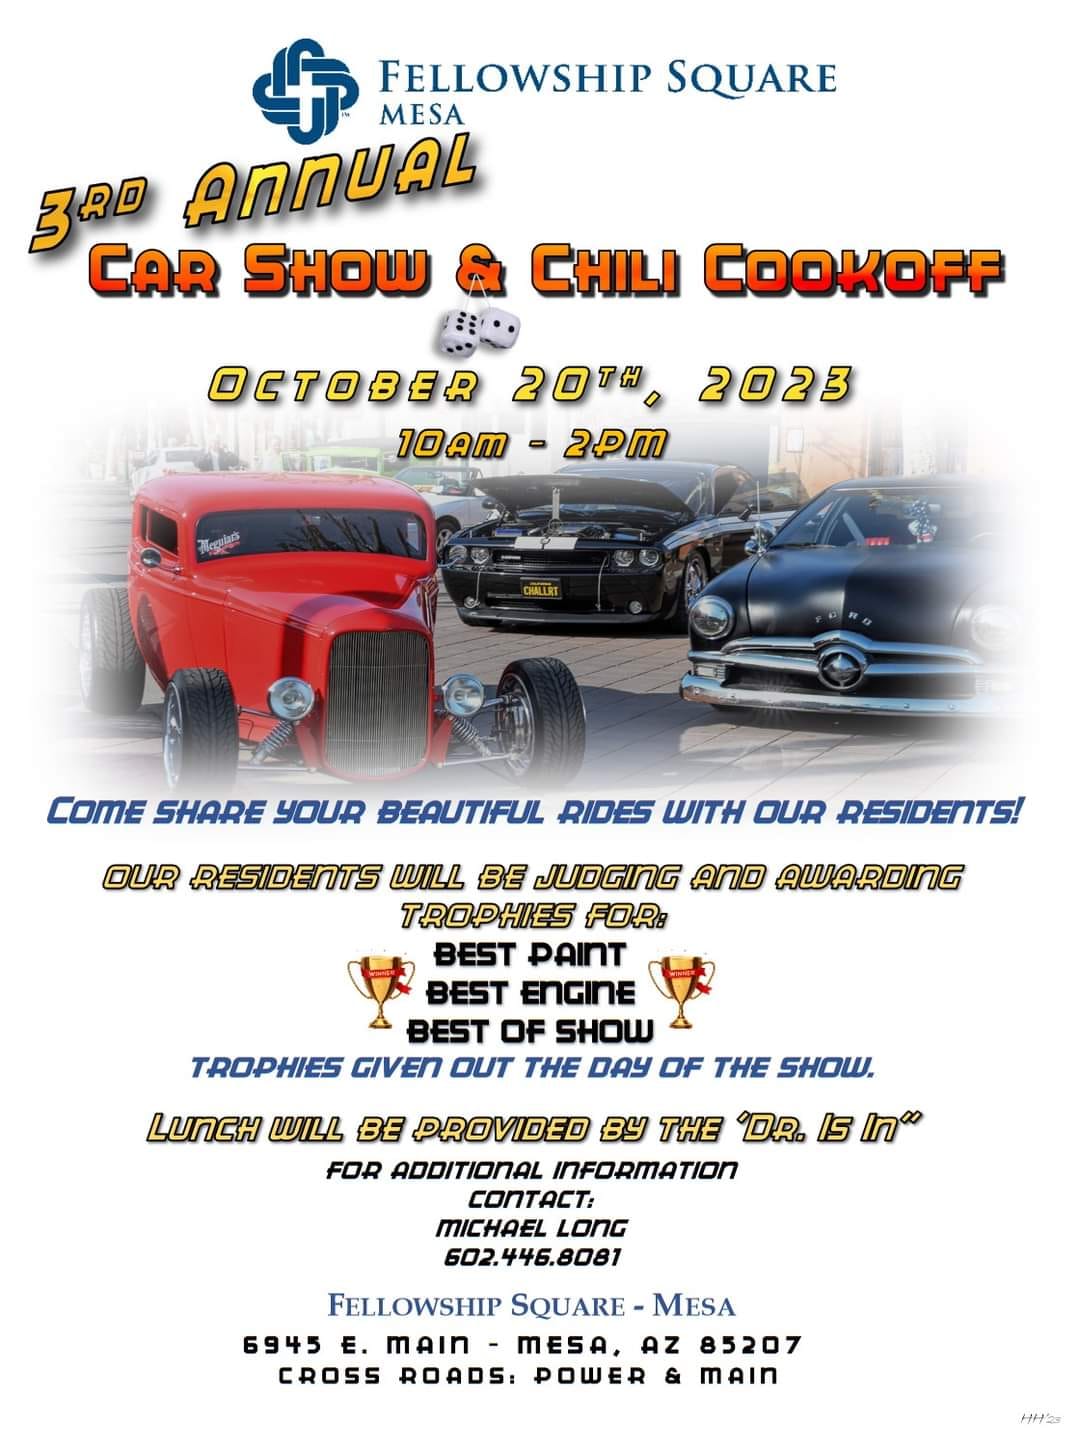 Car Show & Chili Cookoff